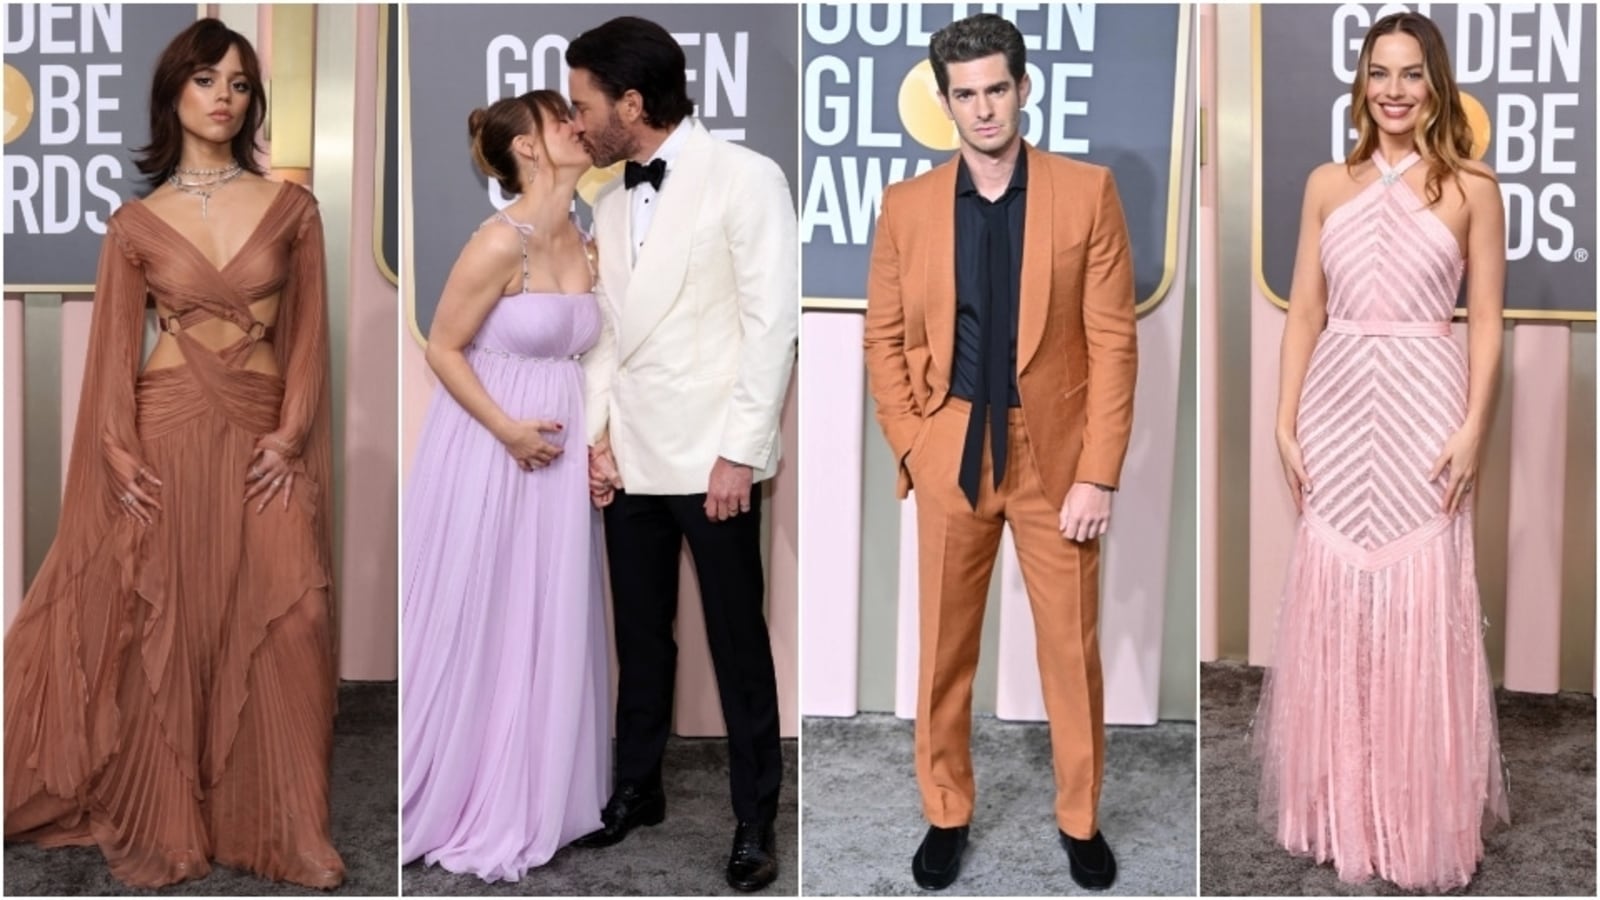 Golden Globe Awards: Jenna Ortega to Kaley Cuoco and Andrew Garfield to  Margot Robbie, who wore what at Golden Globes | Hindustan Times